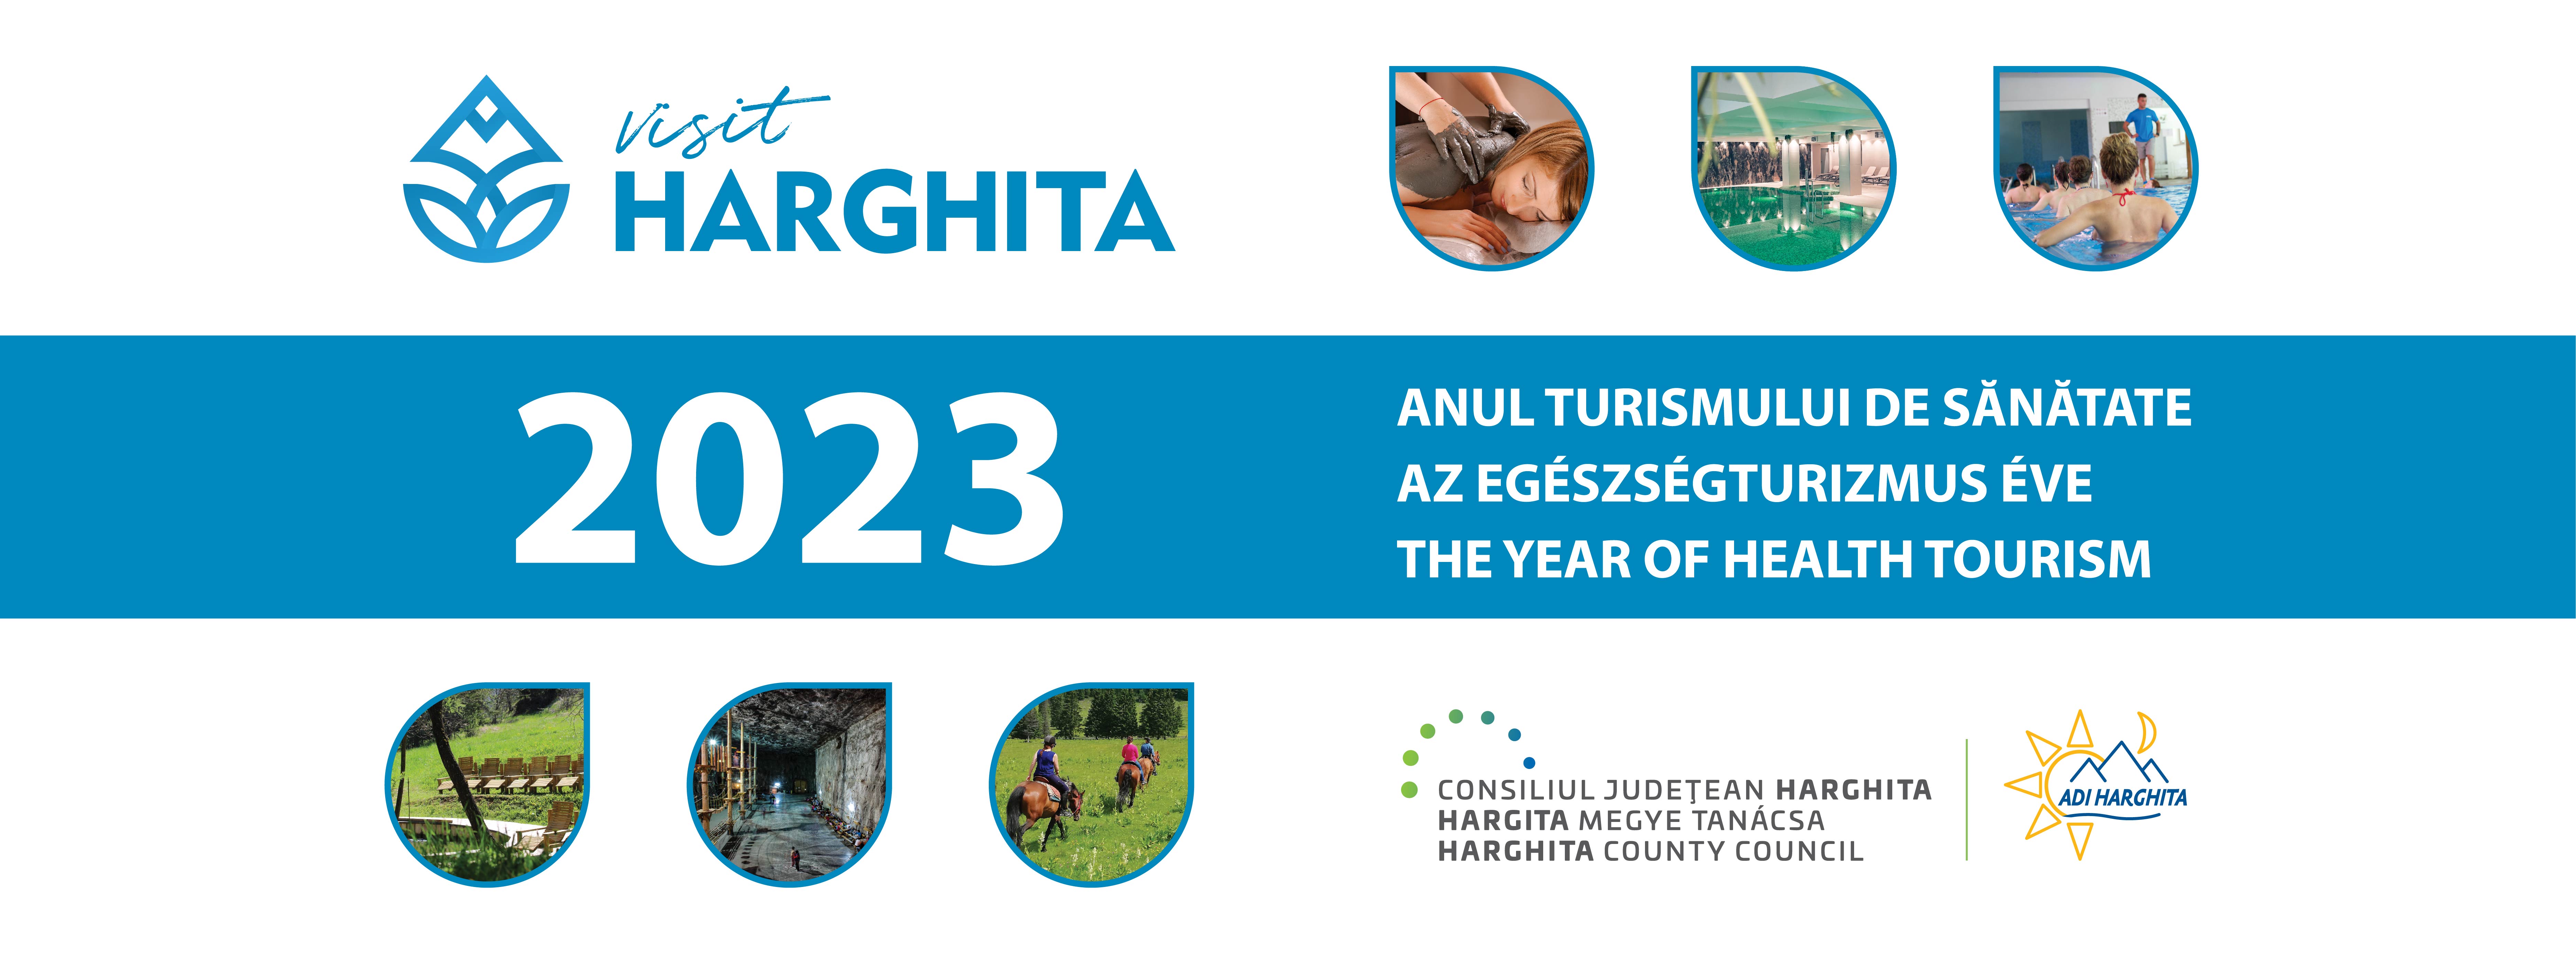 Visit Harghita – The year of health tourism 